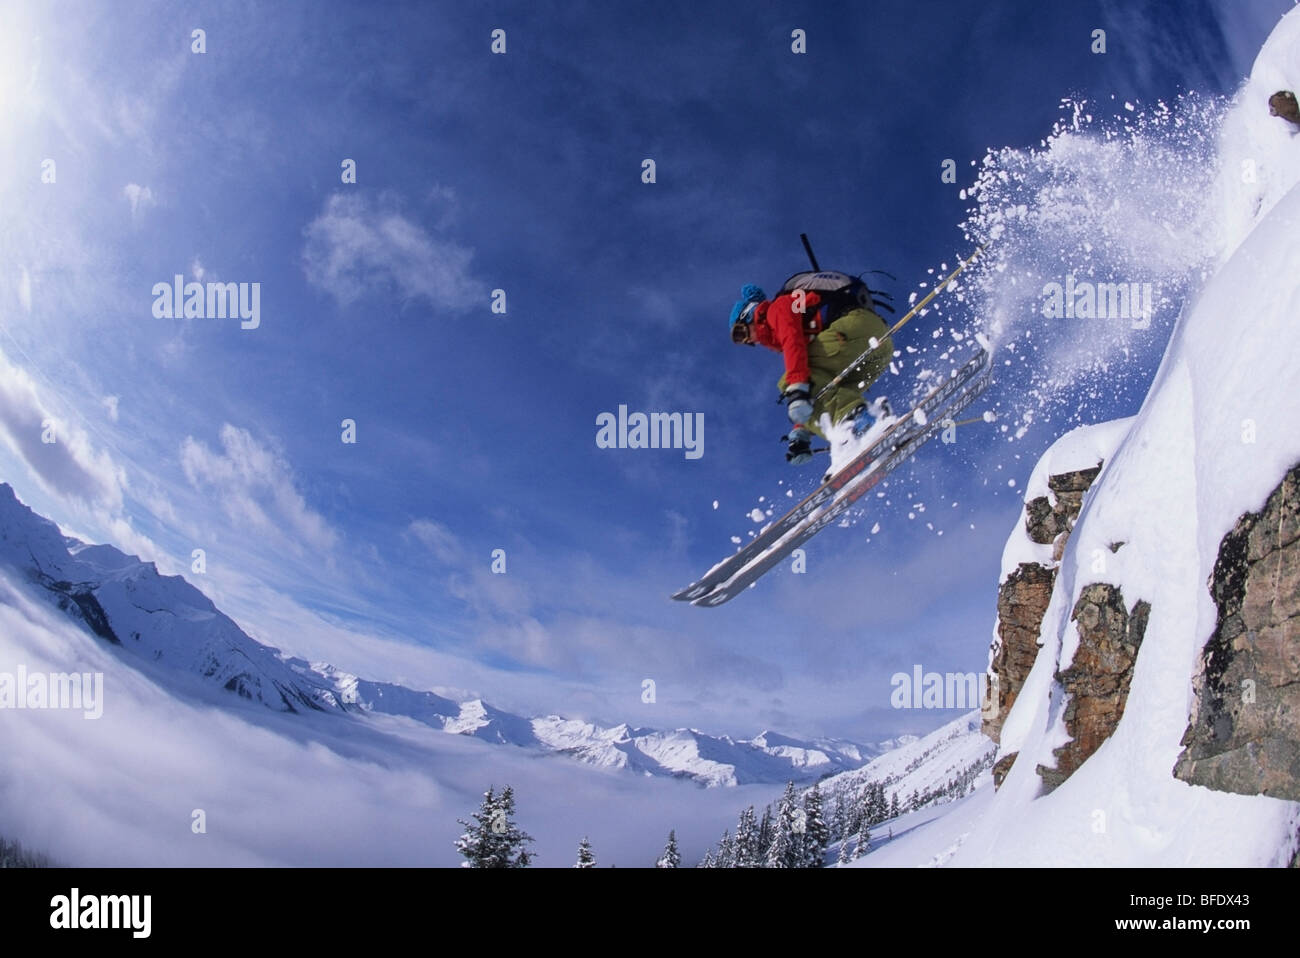 Airborne skier in the backcountry of Kicking Horse Resort, Golden, British Columbia, Canada Stock Photo